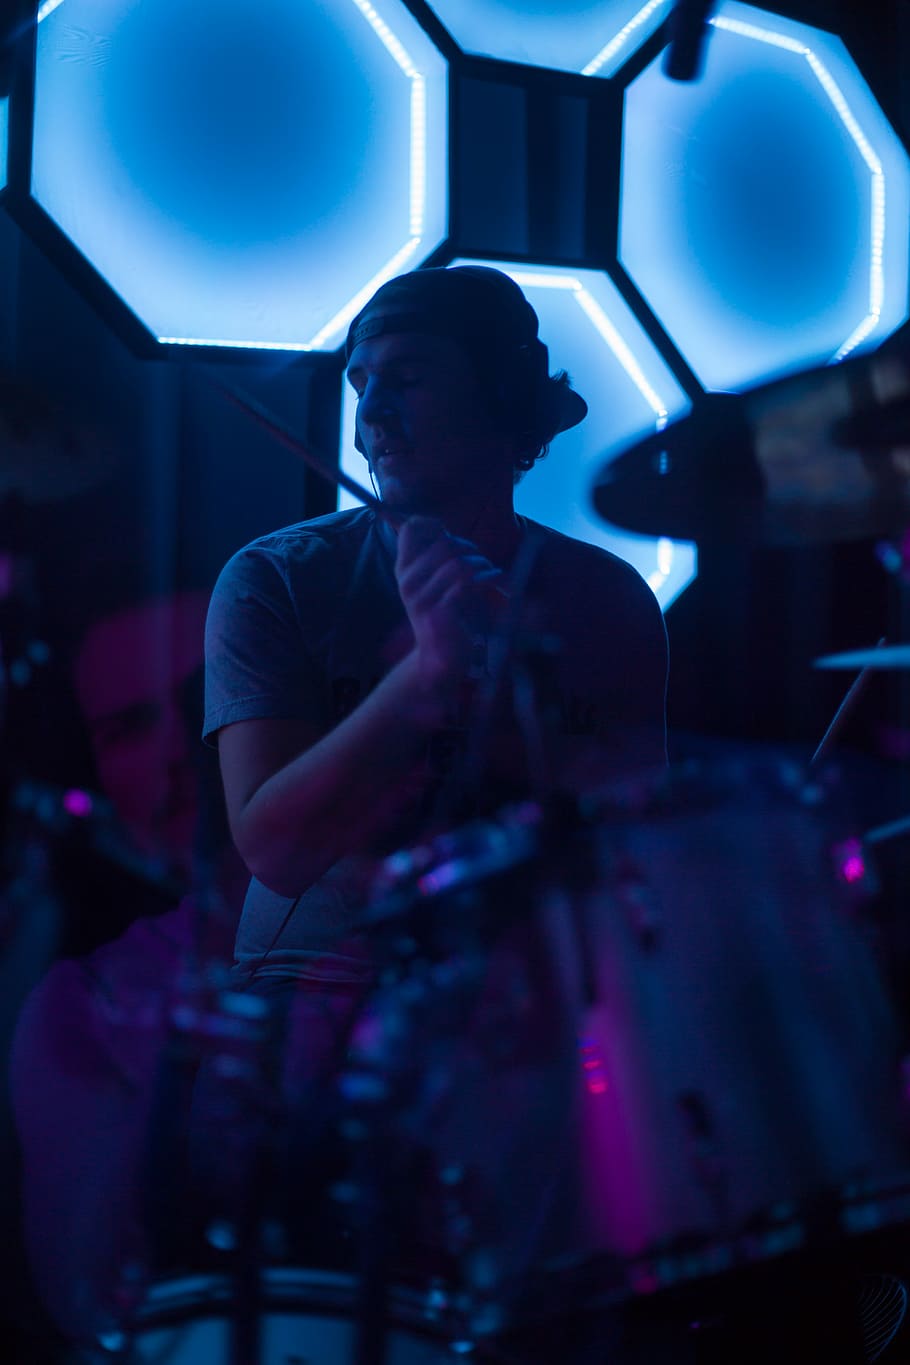 man playing guitar close-up photo, man holding drum stick playing drum near the black and blue wall